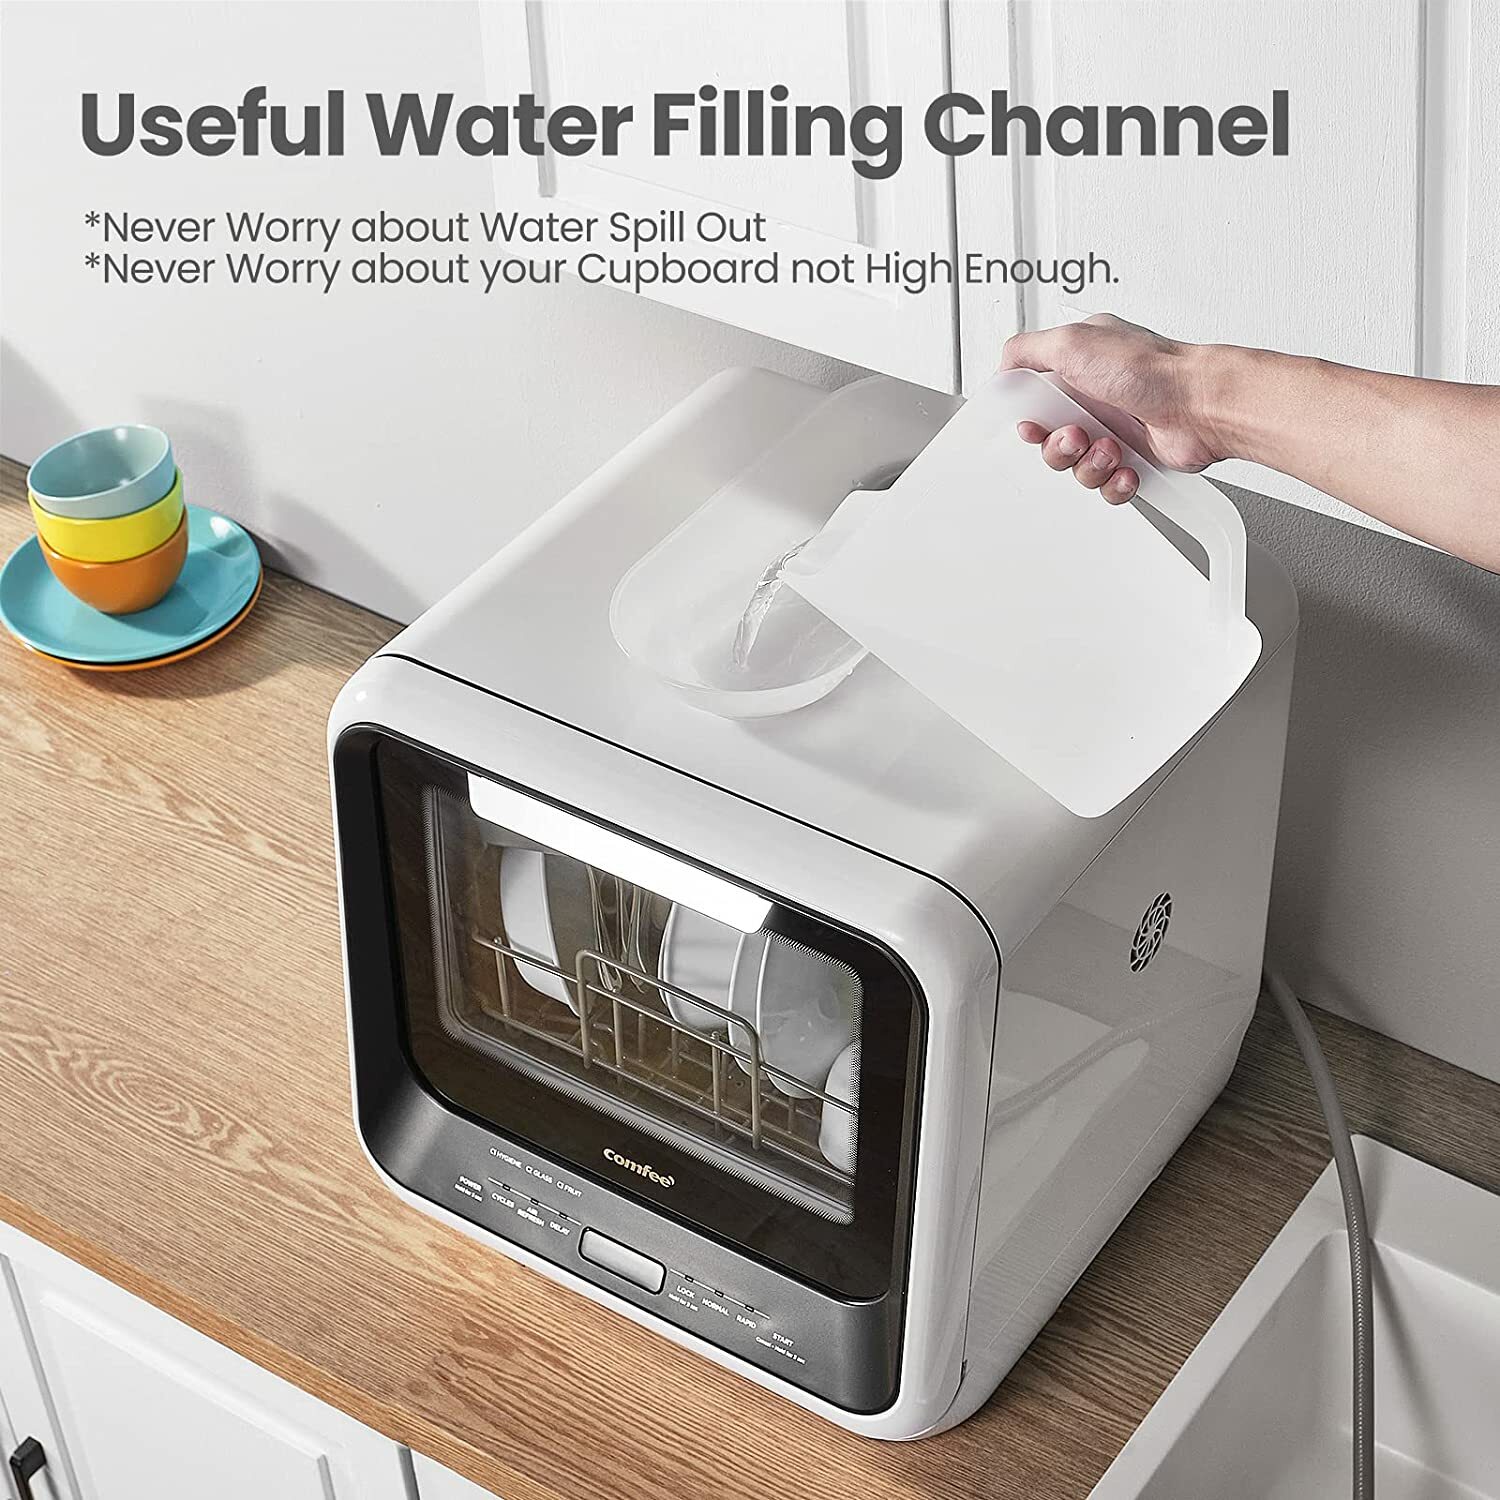 COMFEE' Portable Dishwasher Countertop Review: The Perfect Solution for  Small Kitchens! 